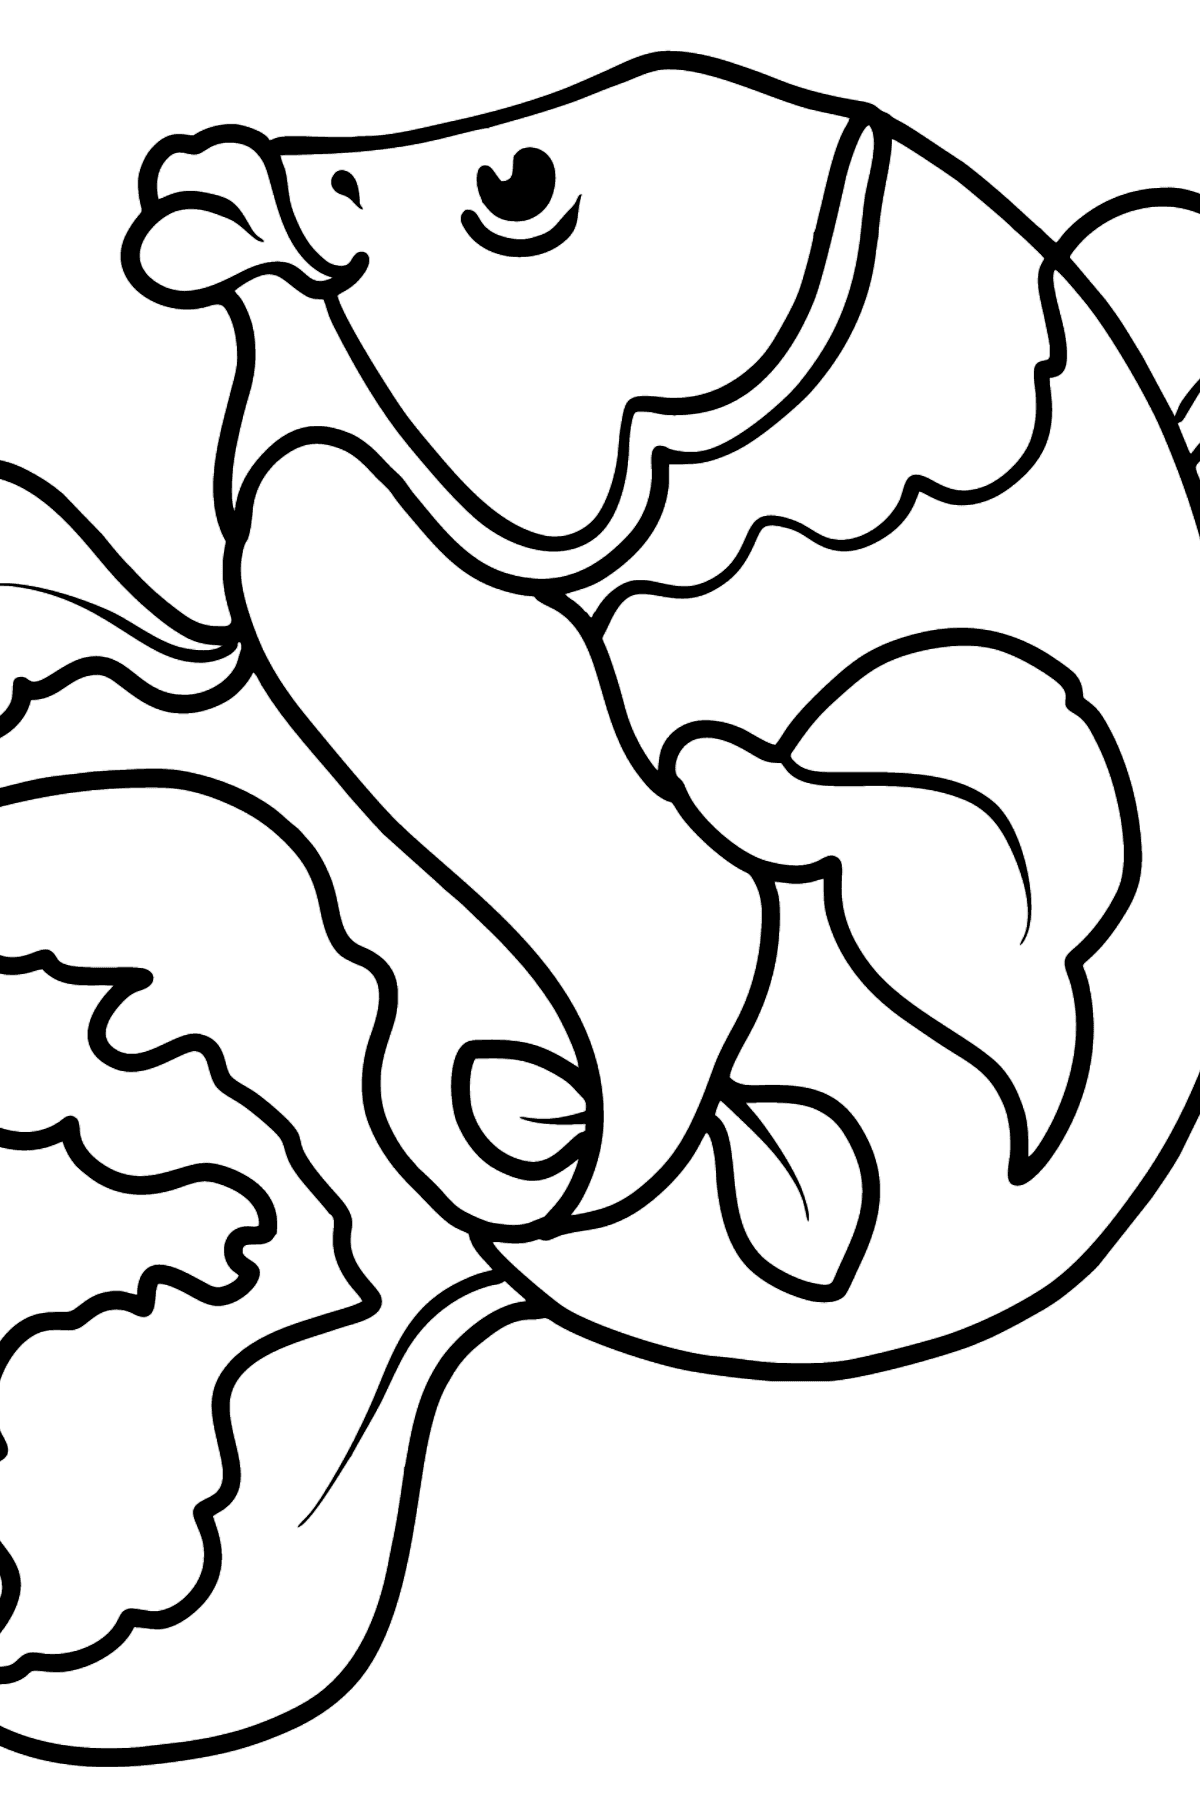 Goldfish coloring page - Coloring Pages for Kids